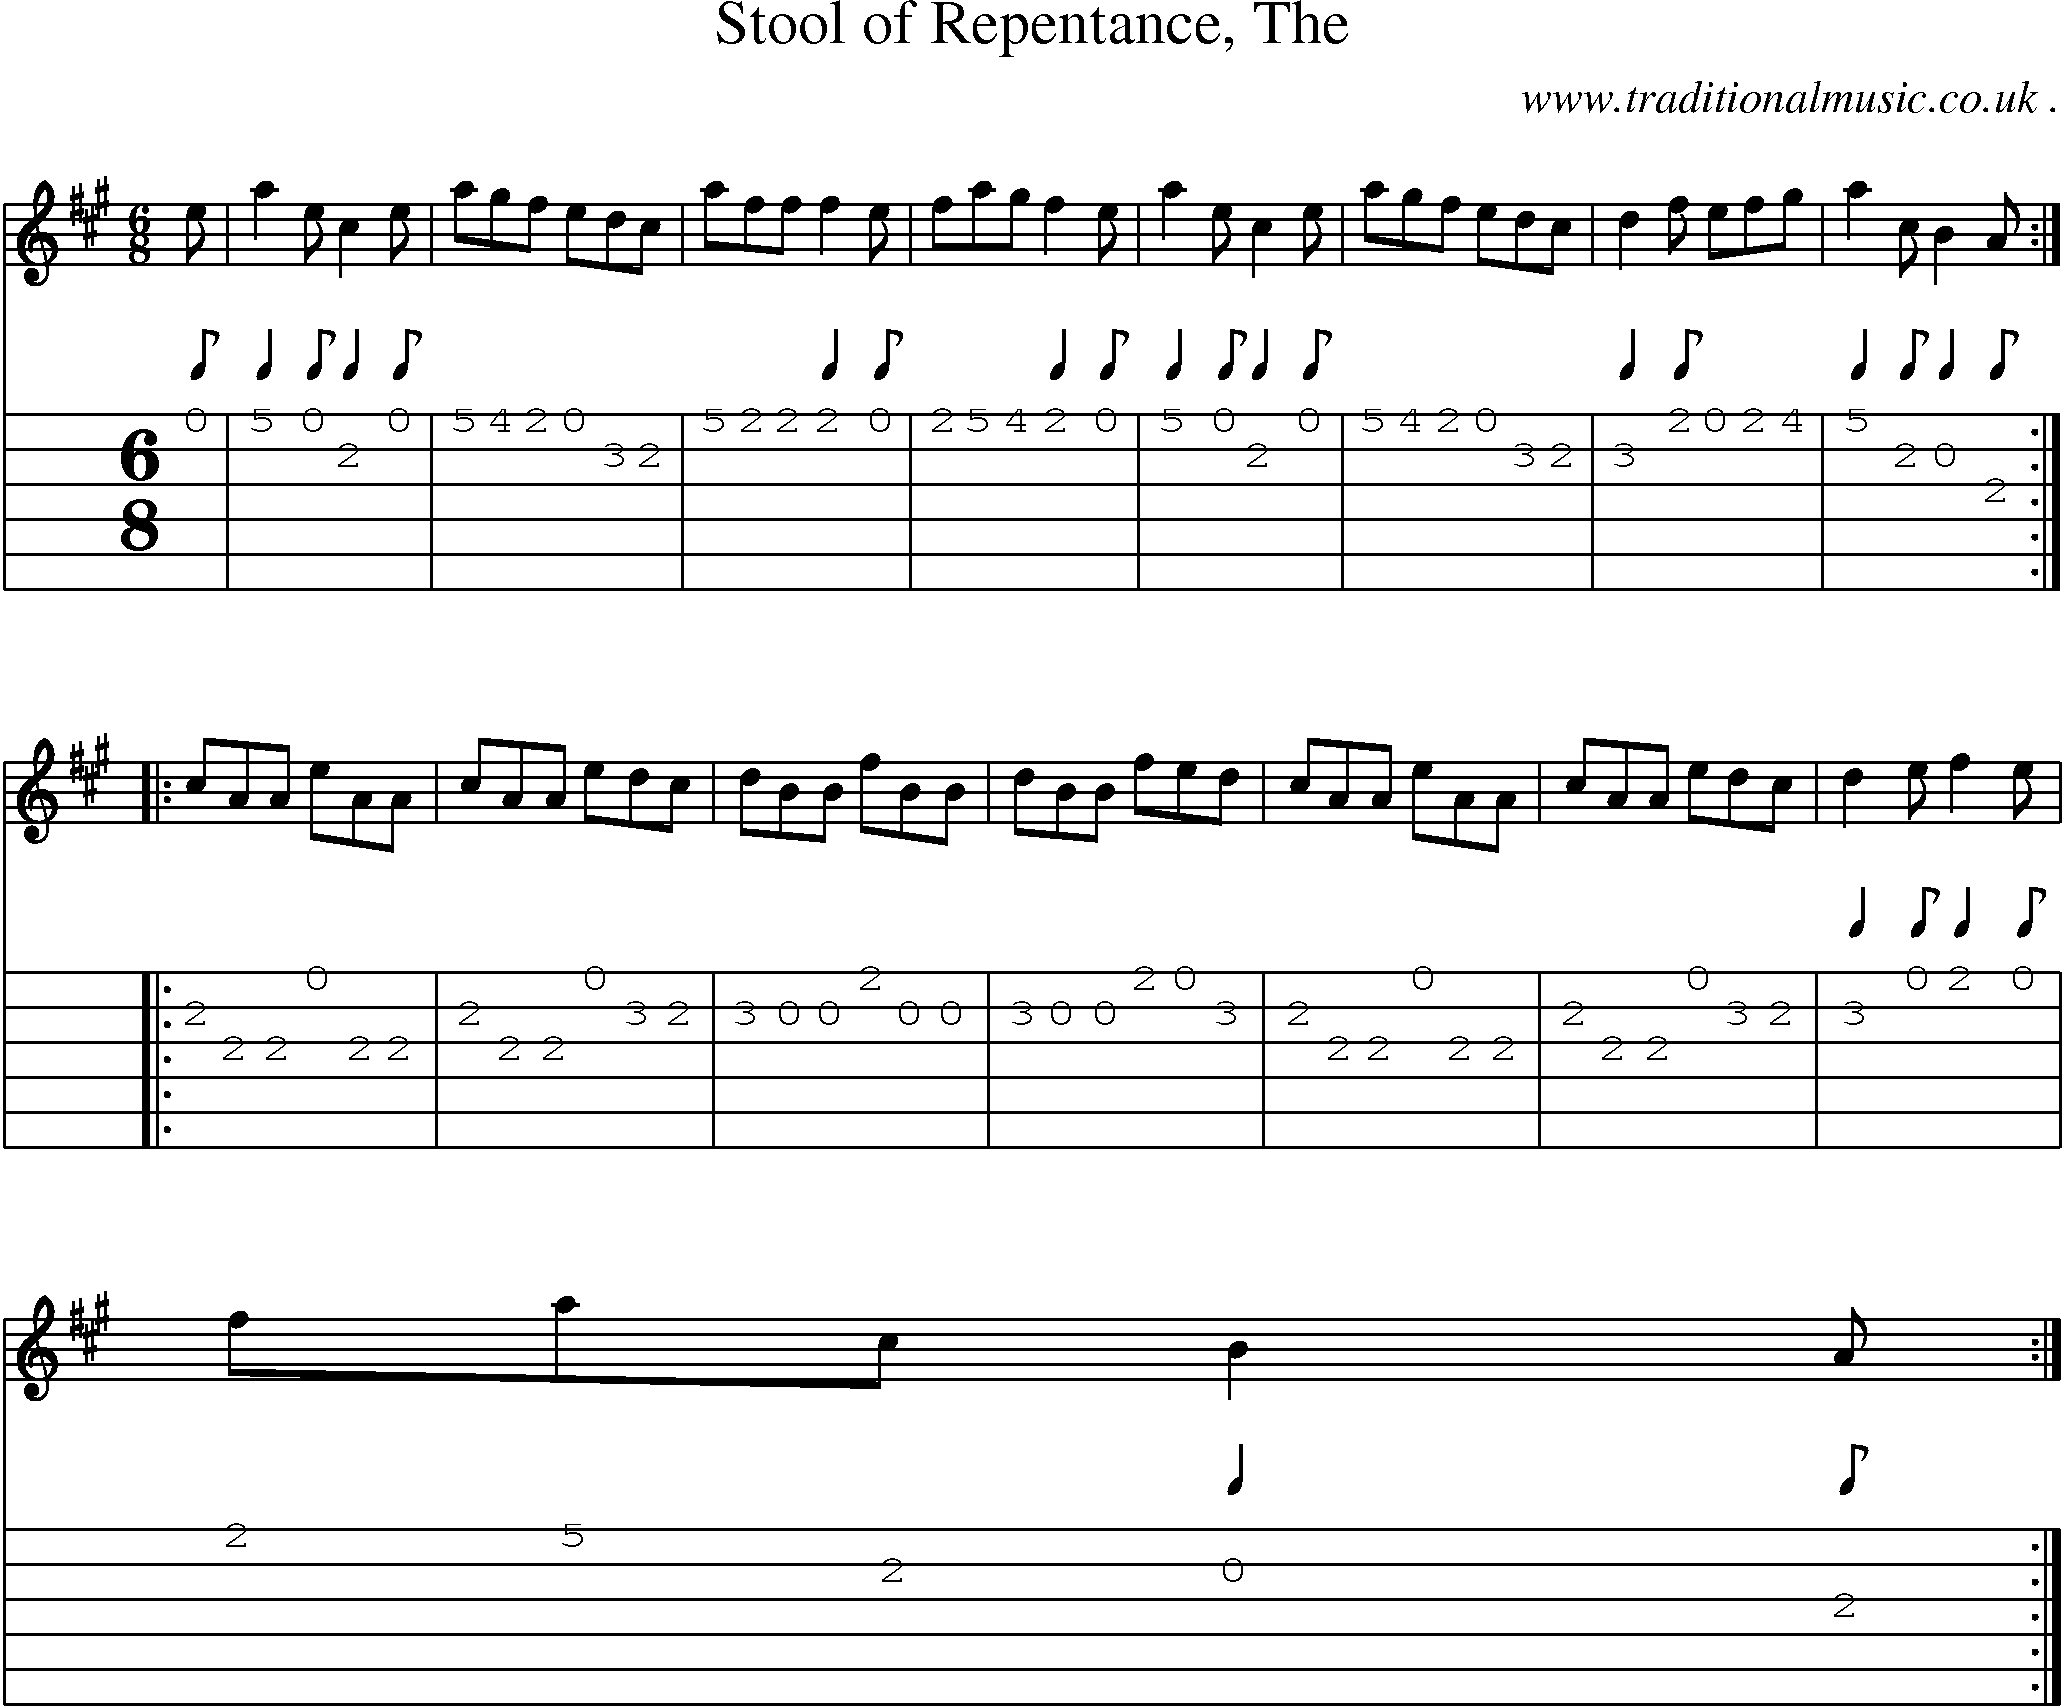 Sheet-music  score, Chords and Guitar Tabs for Stool Of Repentance The